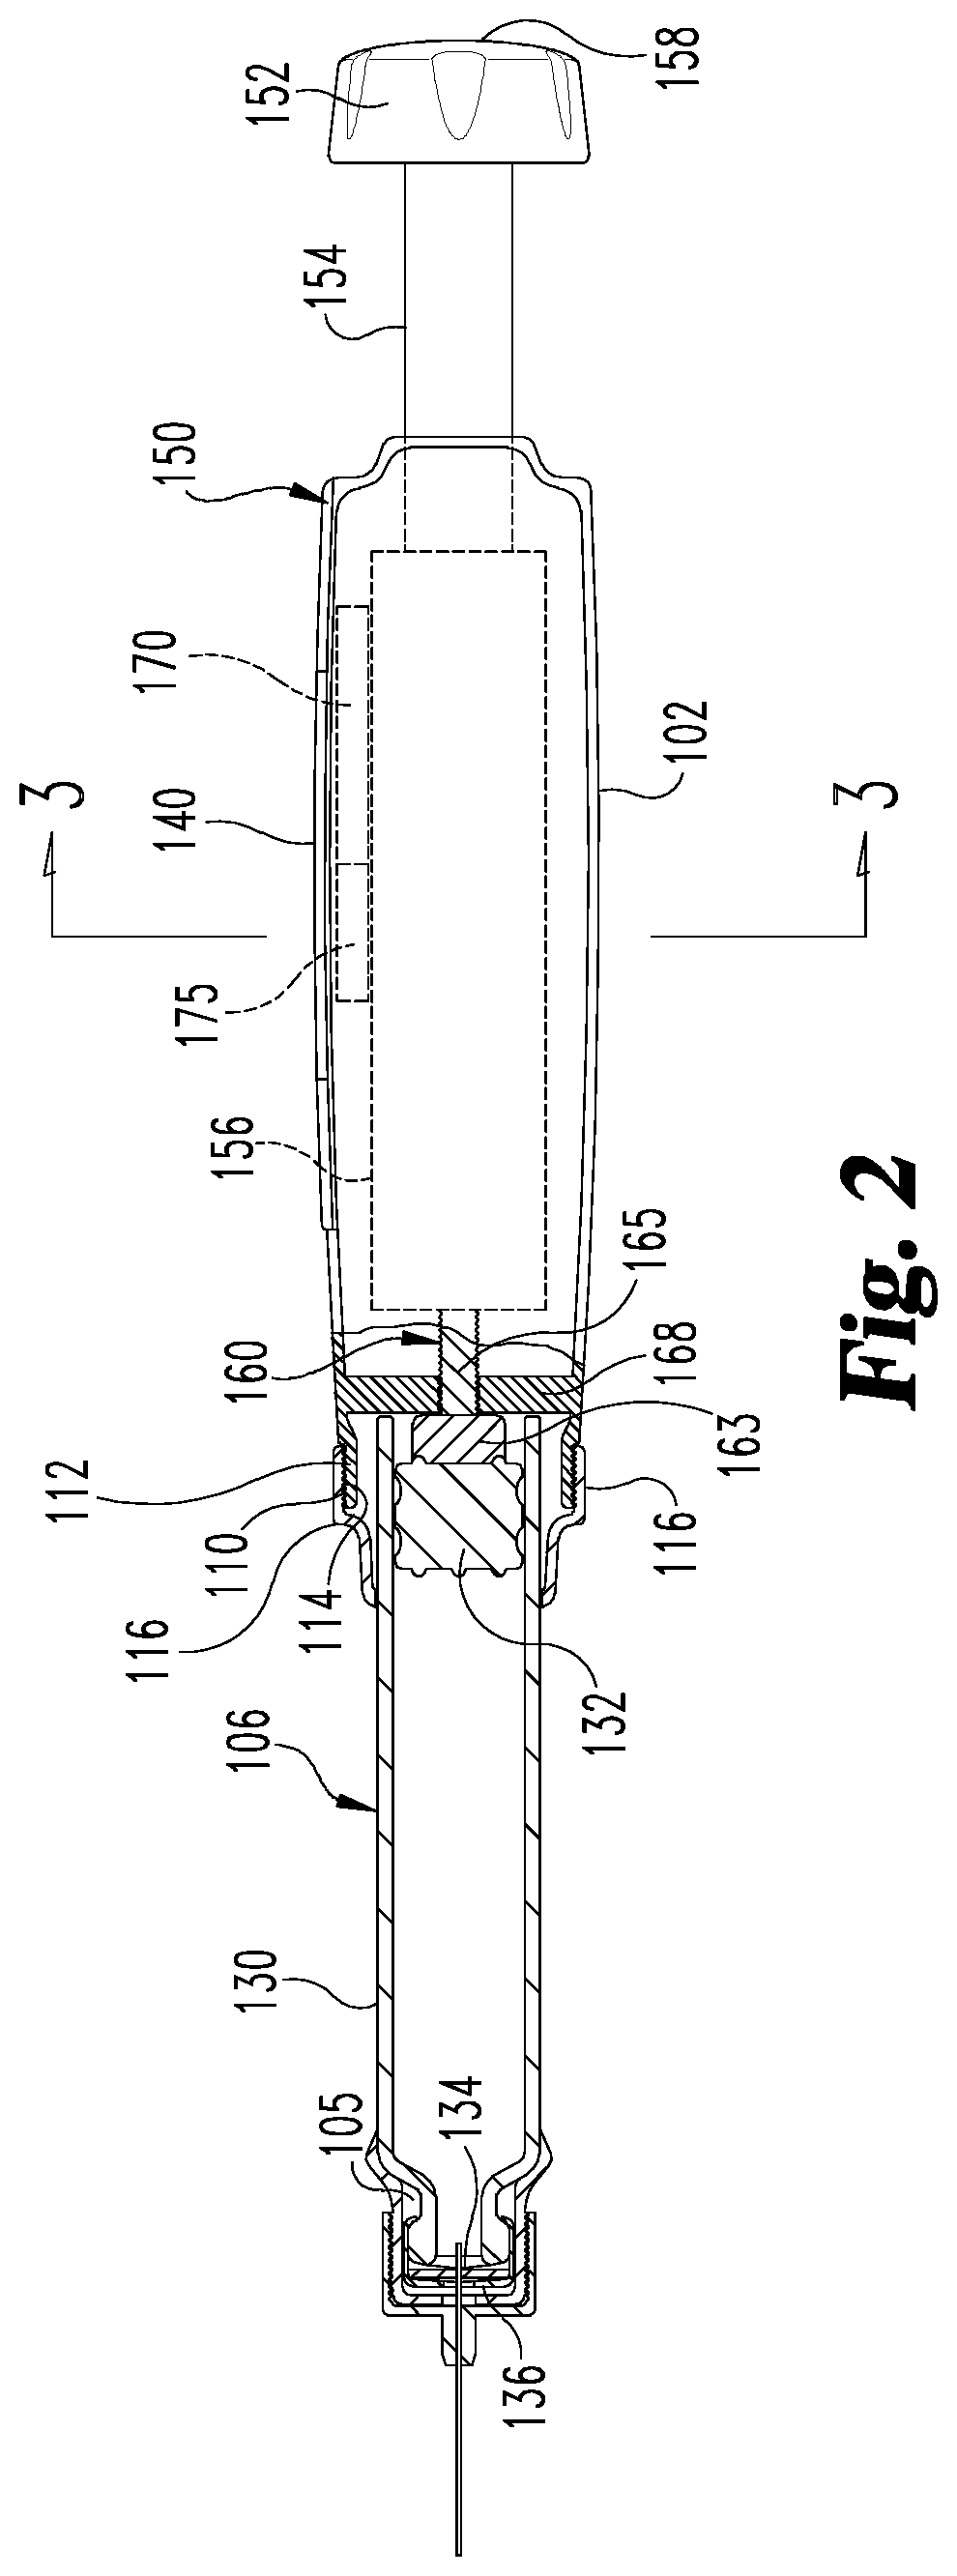 Medication delivery device with sensing system